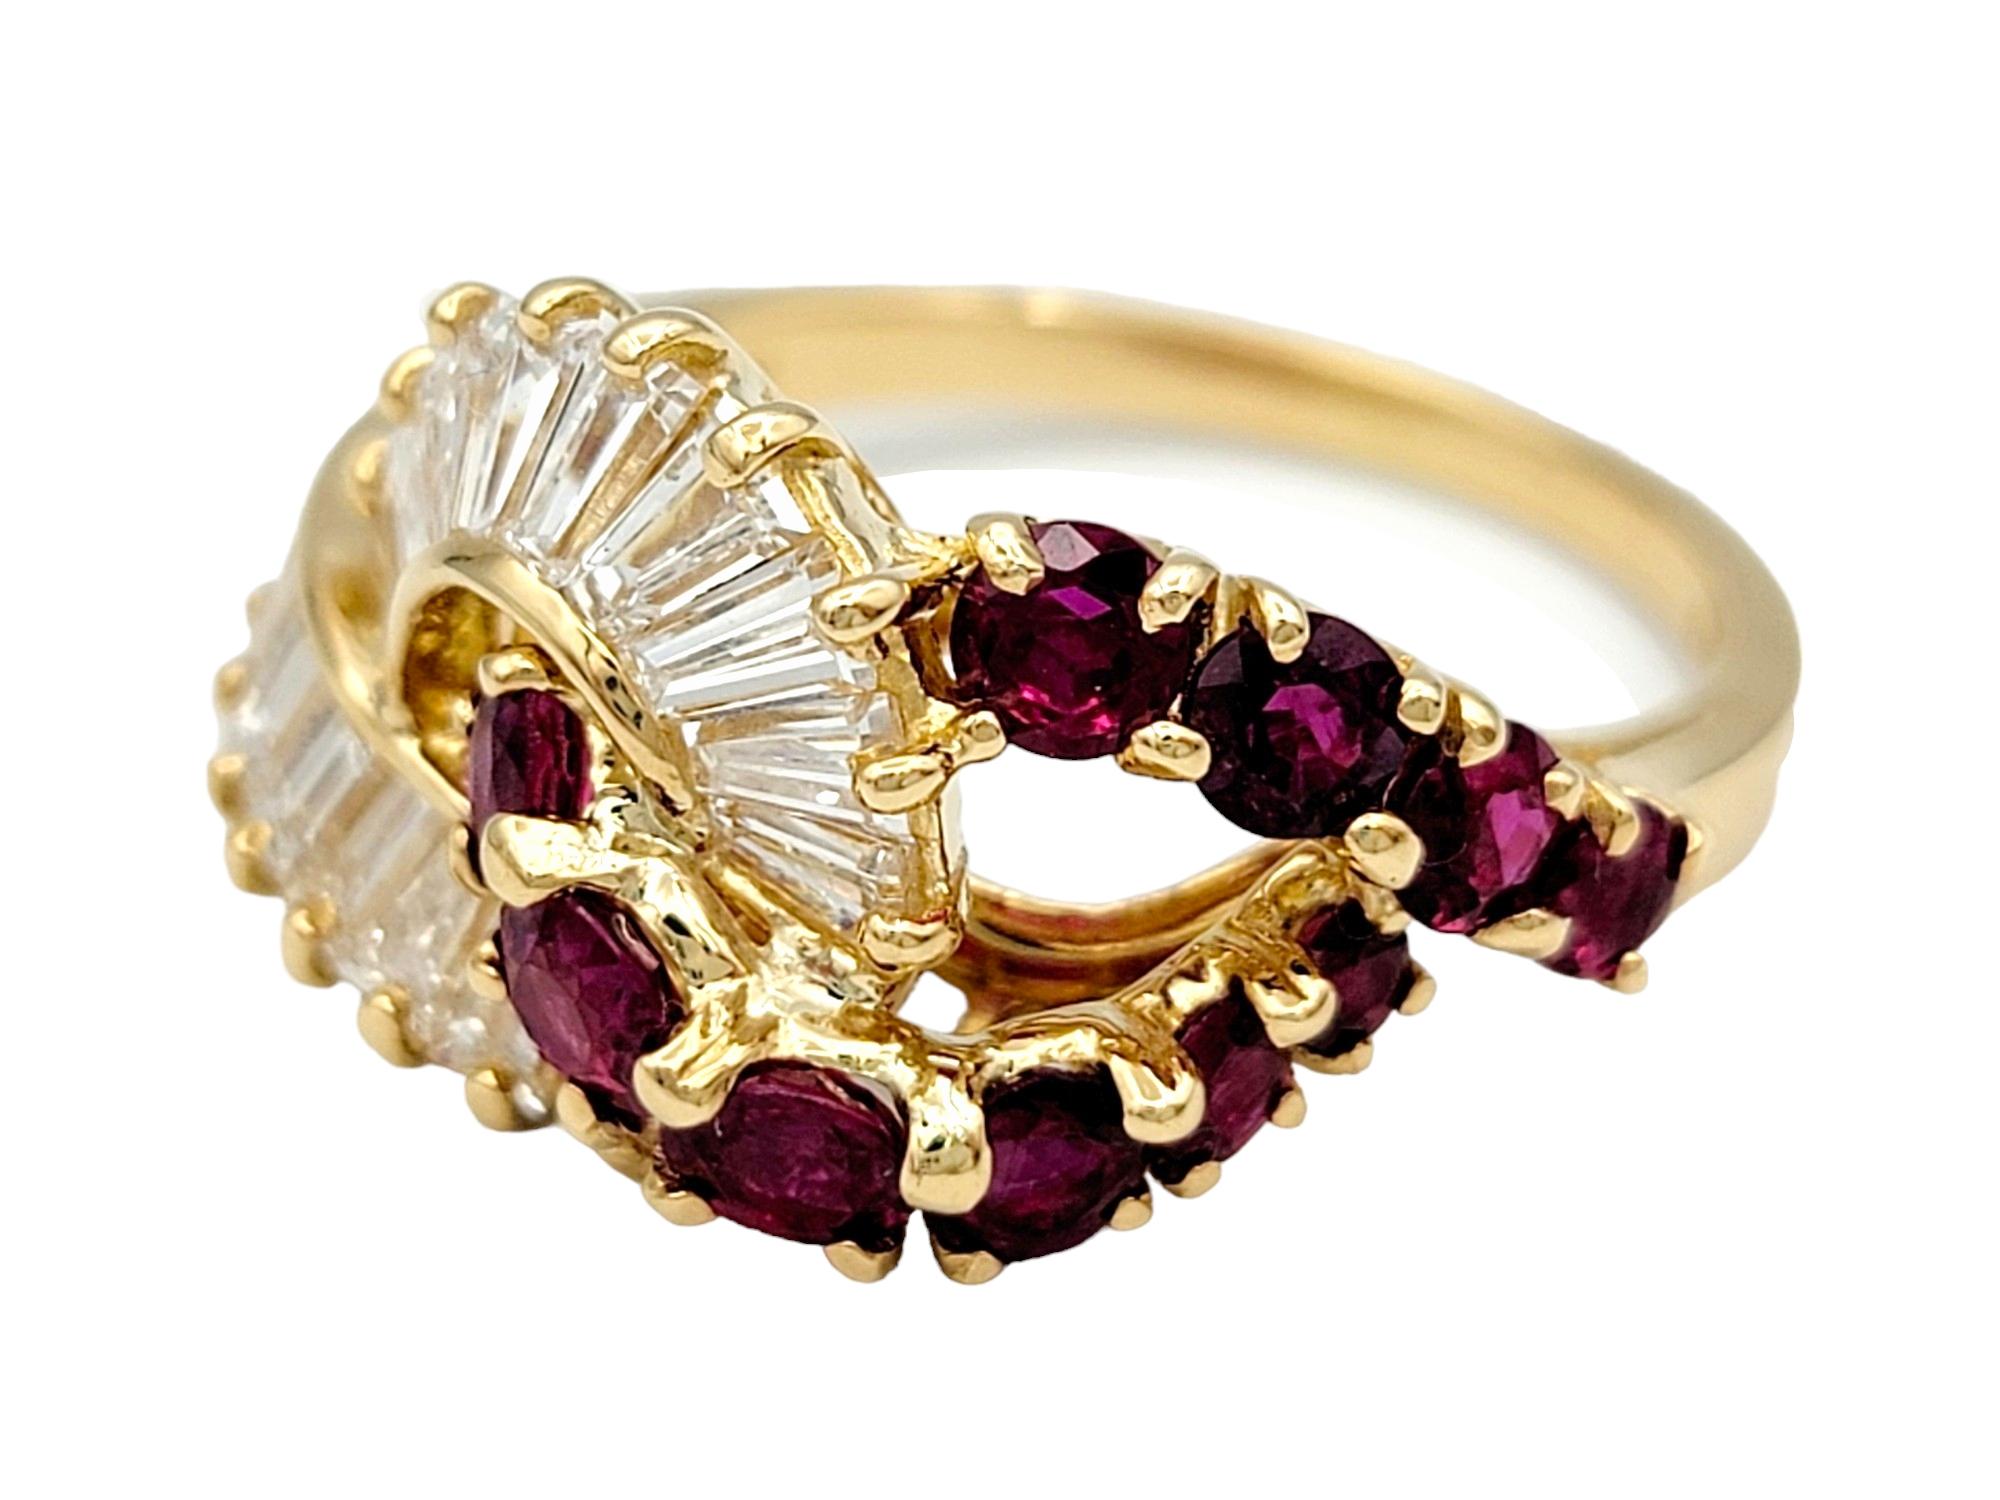 Hammerman Brothers Diamond and Ruby Infinity Style Ring in 18 Karat Yellow Gold In Good Condition For Sale In Scottsdale, AZ